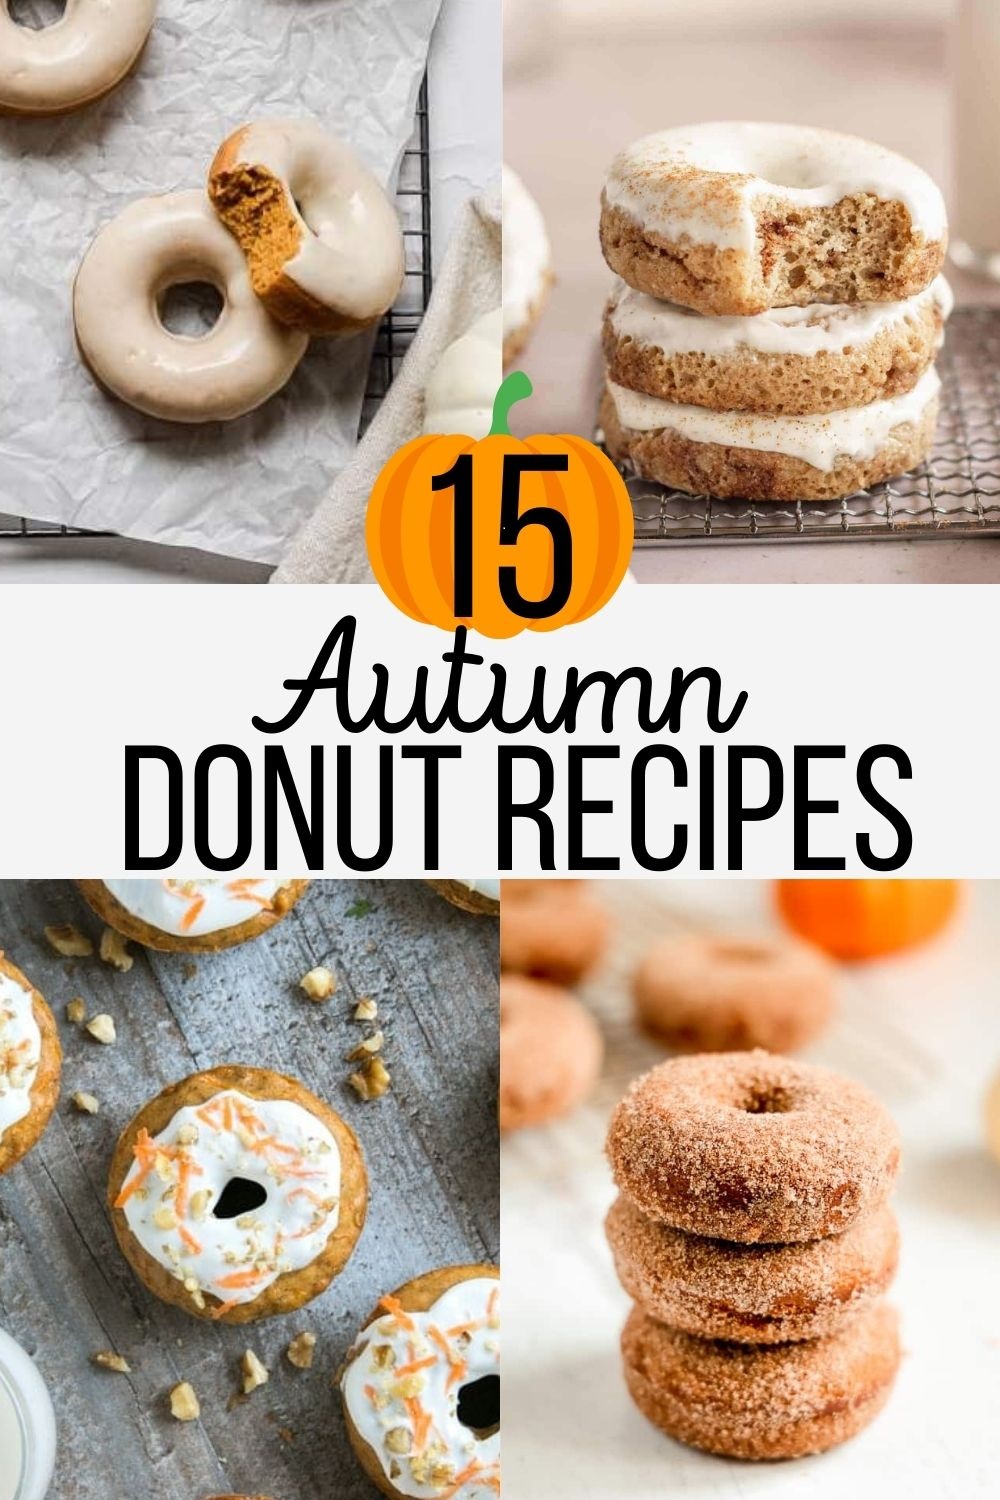 homemade donut recipes featuring pumpkin and other fall themed ingredients